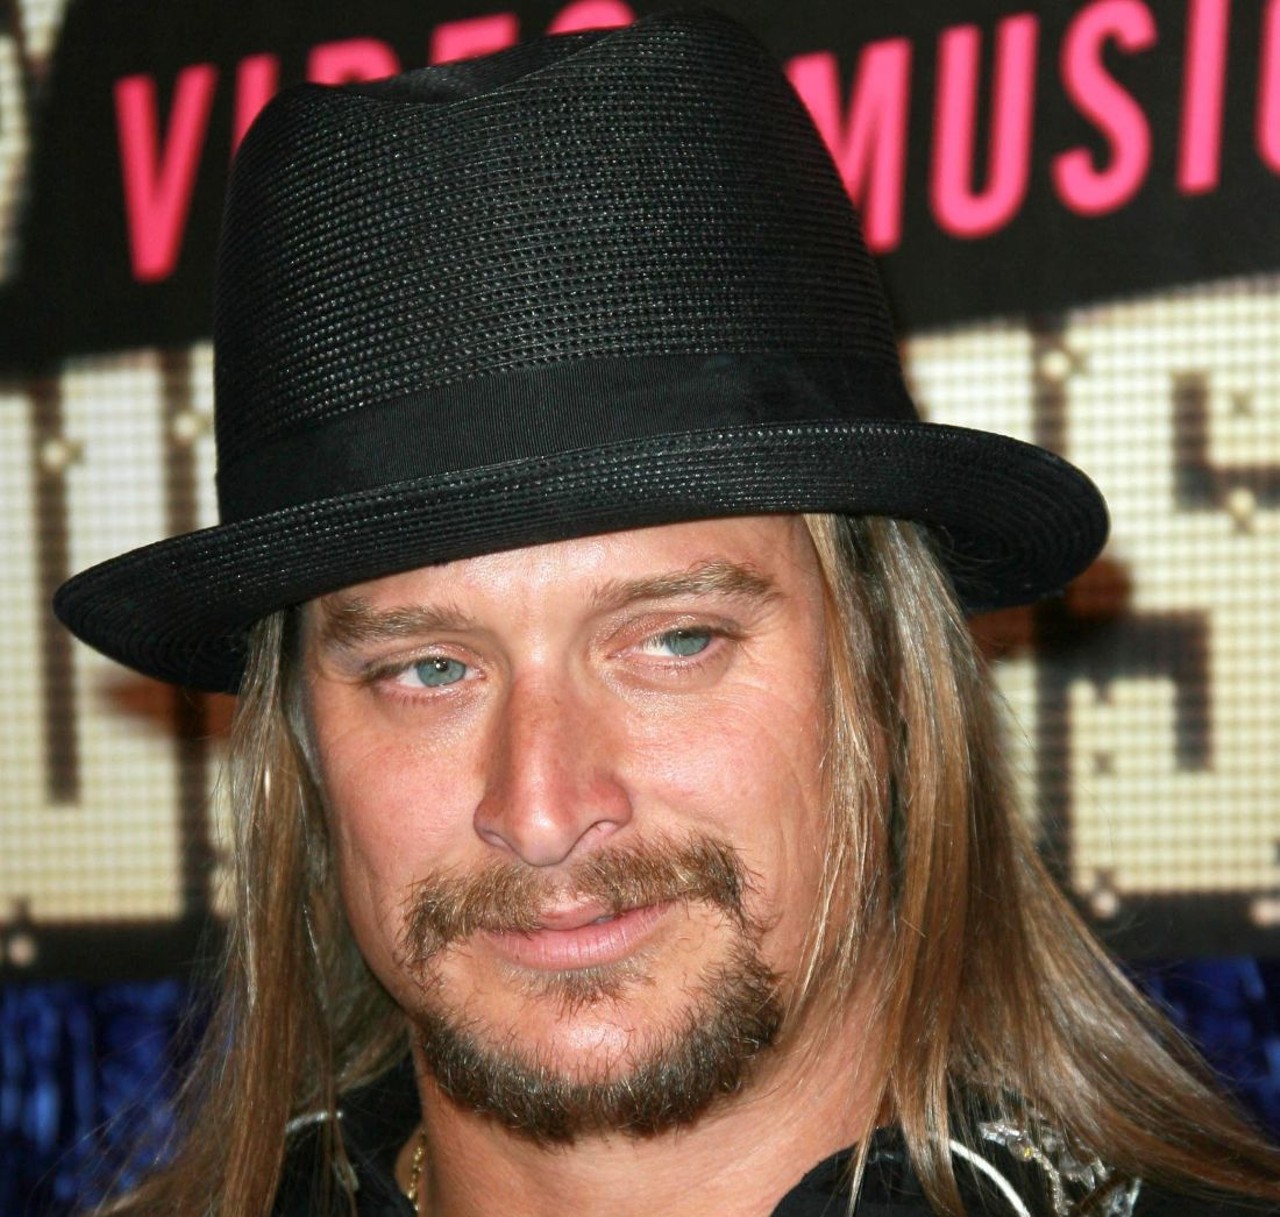 Kid Rock
In 2020, I resolve to...
go to rehab.
Photo via Shutterstock